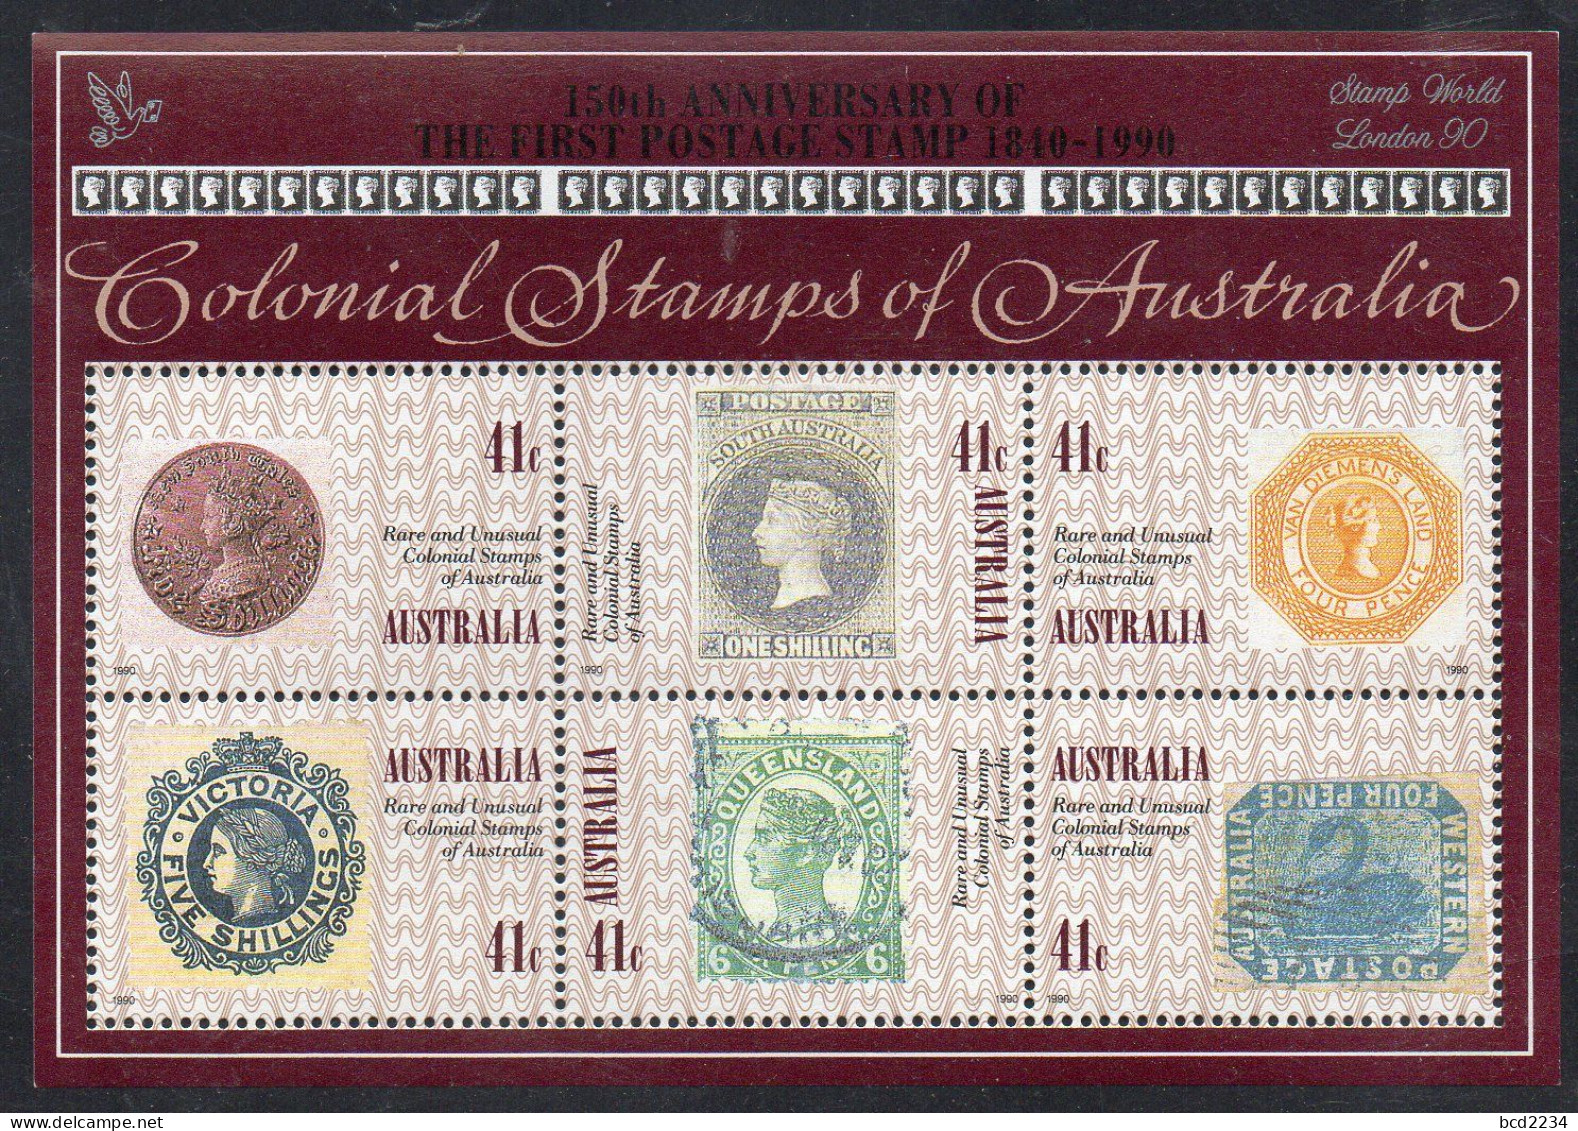 AUSTRALIA 1990 RARE & UNUSUAL COLONIAL STAMPS + SILVER STAMP WORLD LONDON 90 OVERPRINT SG MS1253 Mi BL 10 MNH - Lettres & Documents